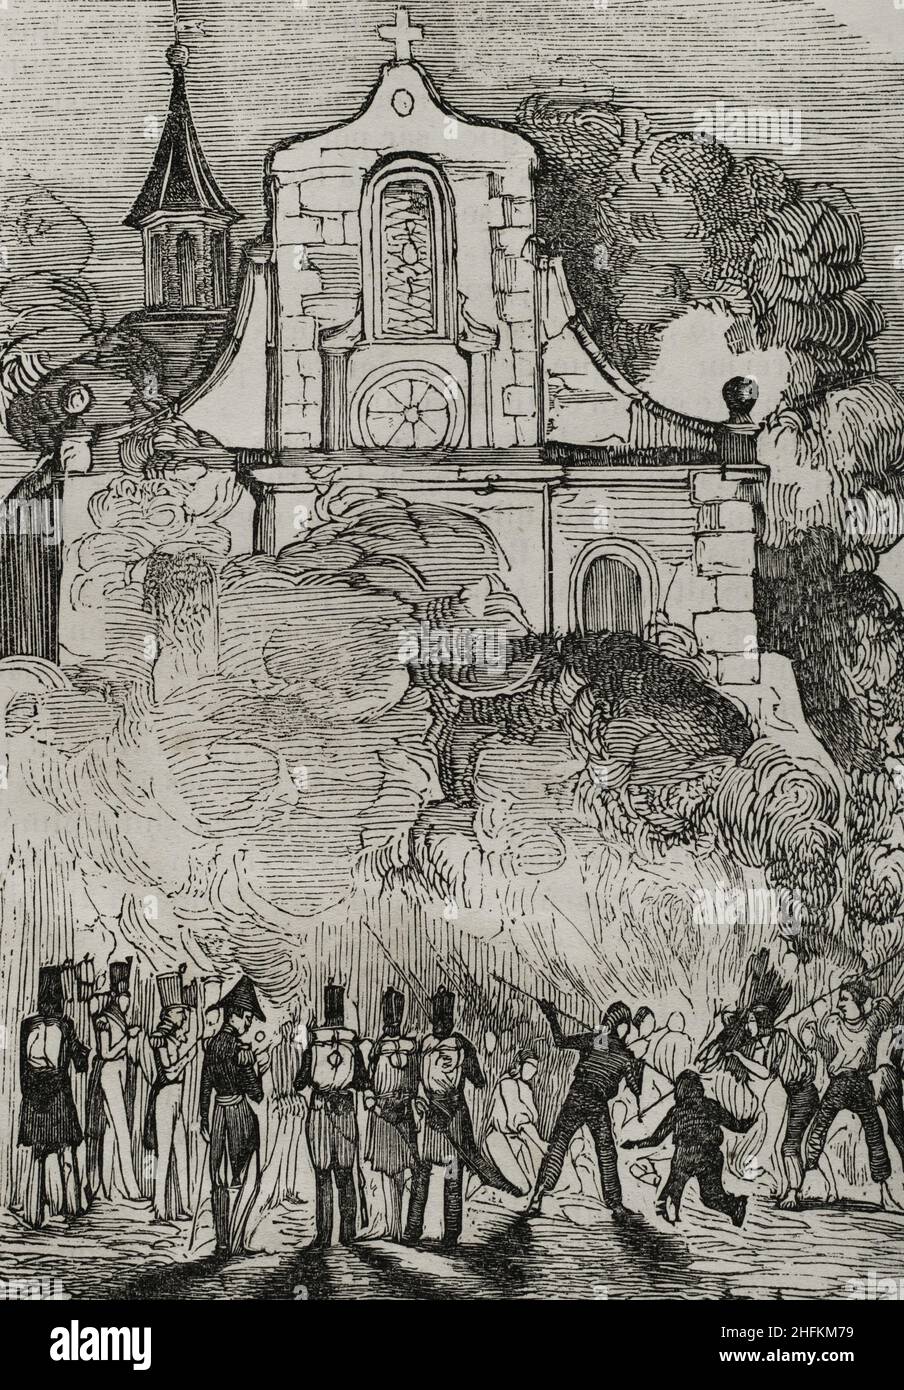 History of Spain. Catalonia. First Carlist War (1833-1840). Anti-clerical riots of 1835. Revolts against the religious orders that took place as a result of their support for the Carlist side. Bullanga of Reus (night of 22 July 1835). Fire at the Franciscan convent in Reus (Tarragona province). Engraving. Panorama Español, Crónica Contemporánea. Volume III. Madrid, 1845. Stock Photo